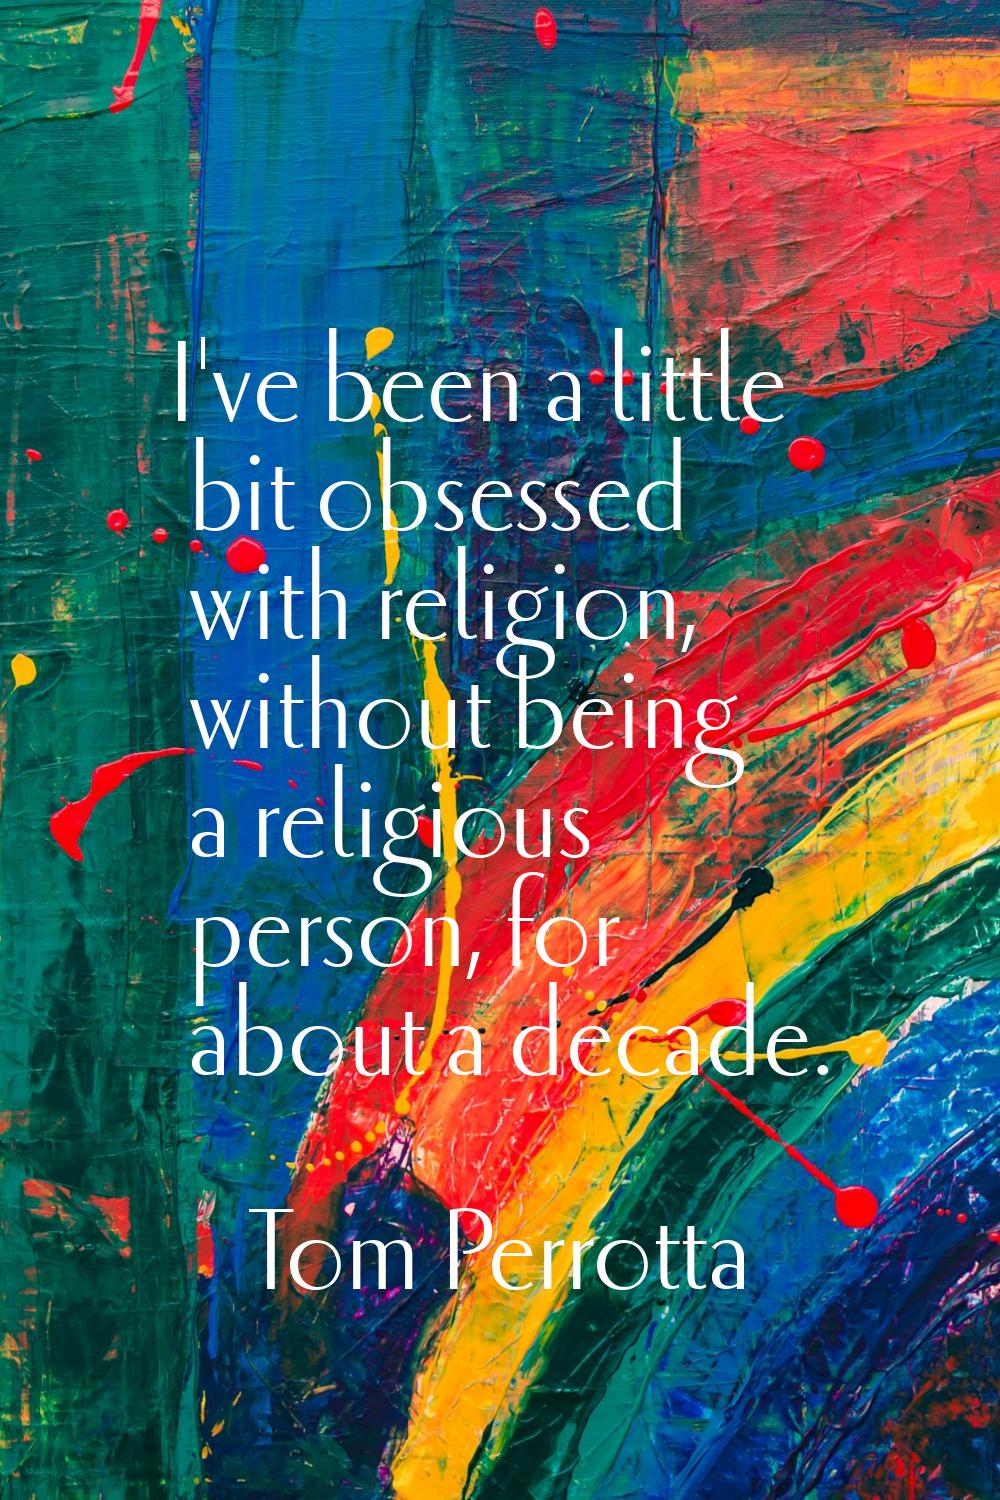 I've been a little bit obsessed with religion, without being a religious person, for about a decade